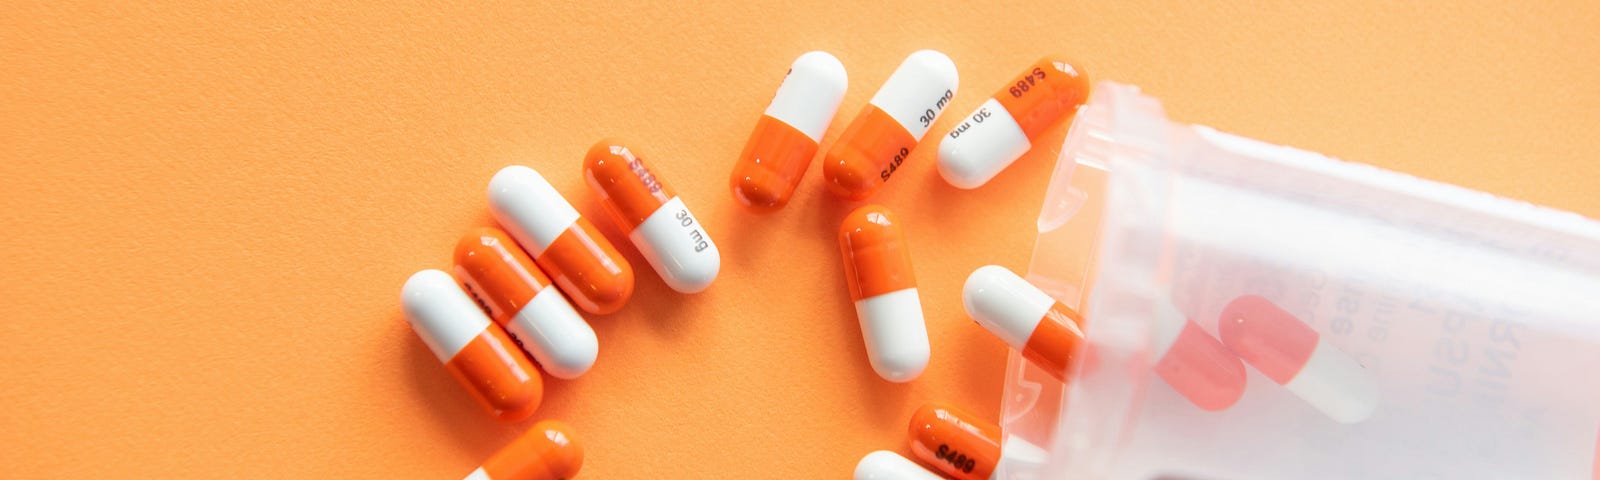 Prescription drugs on an orange background with a pill bottle.